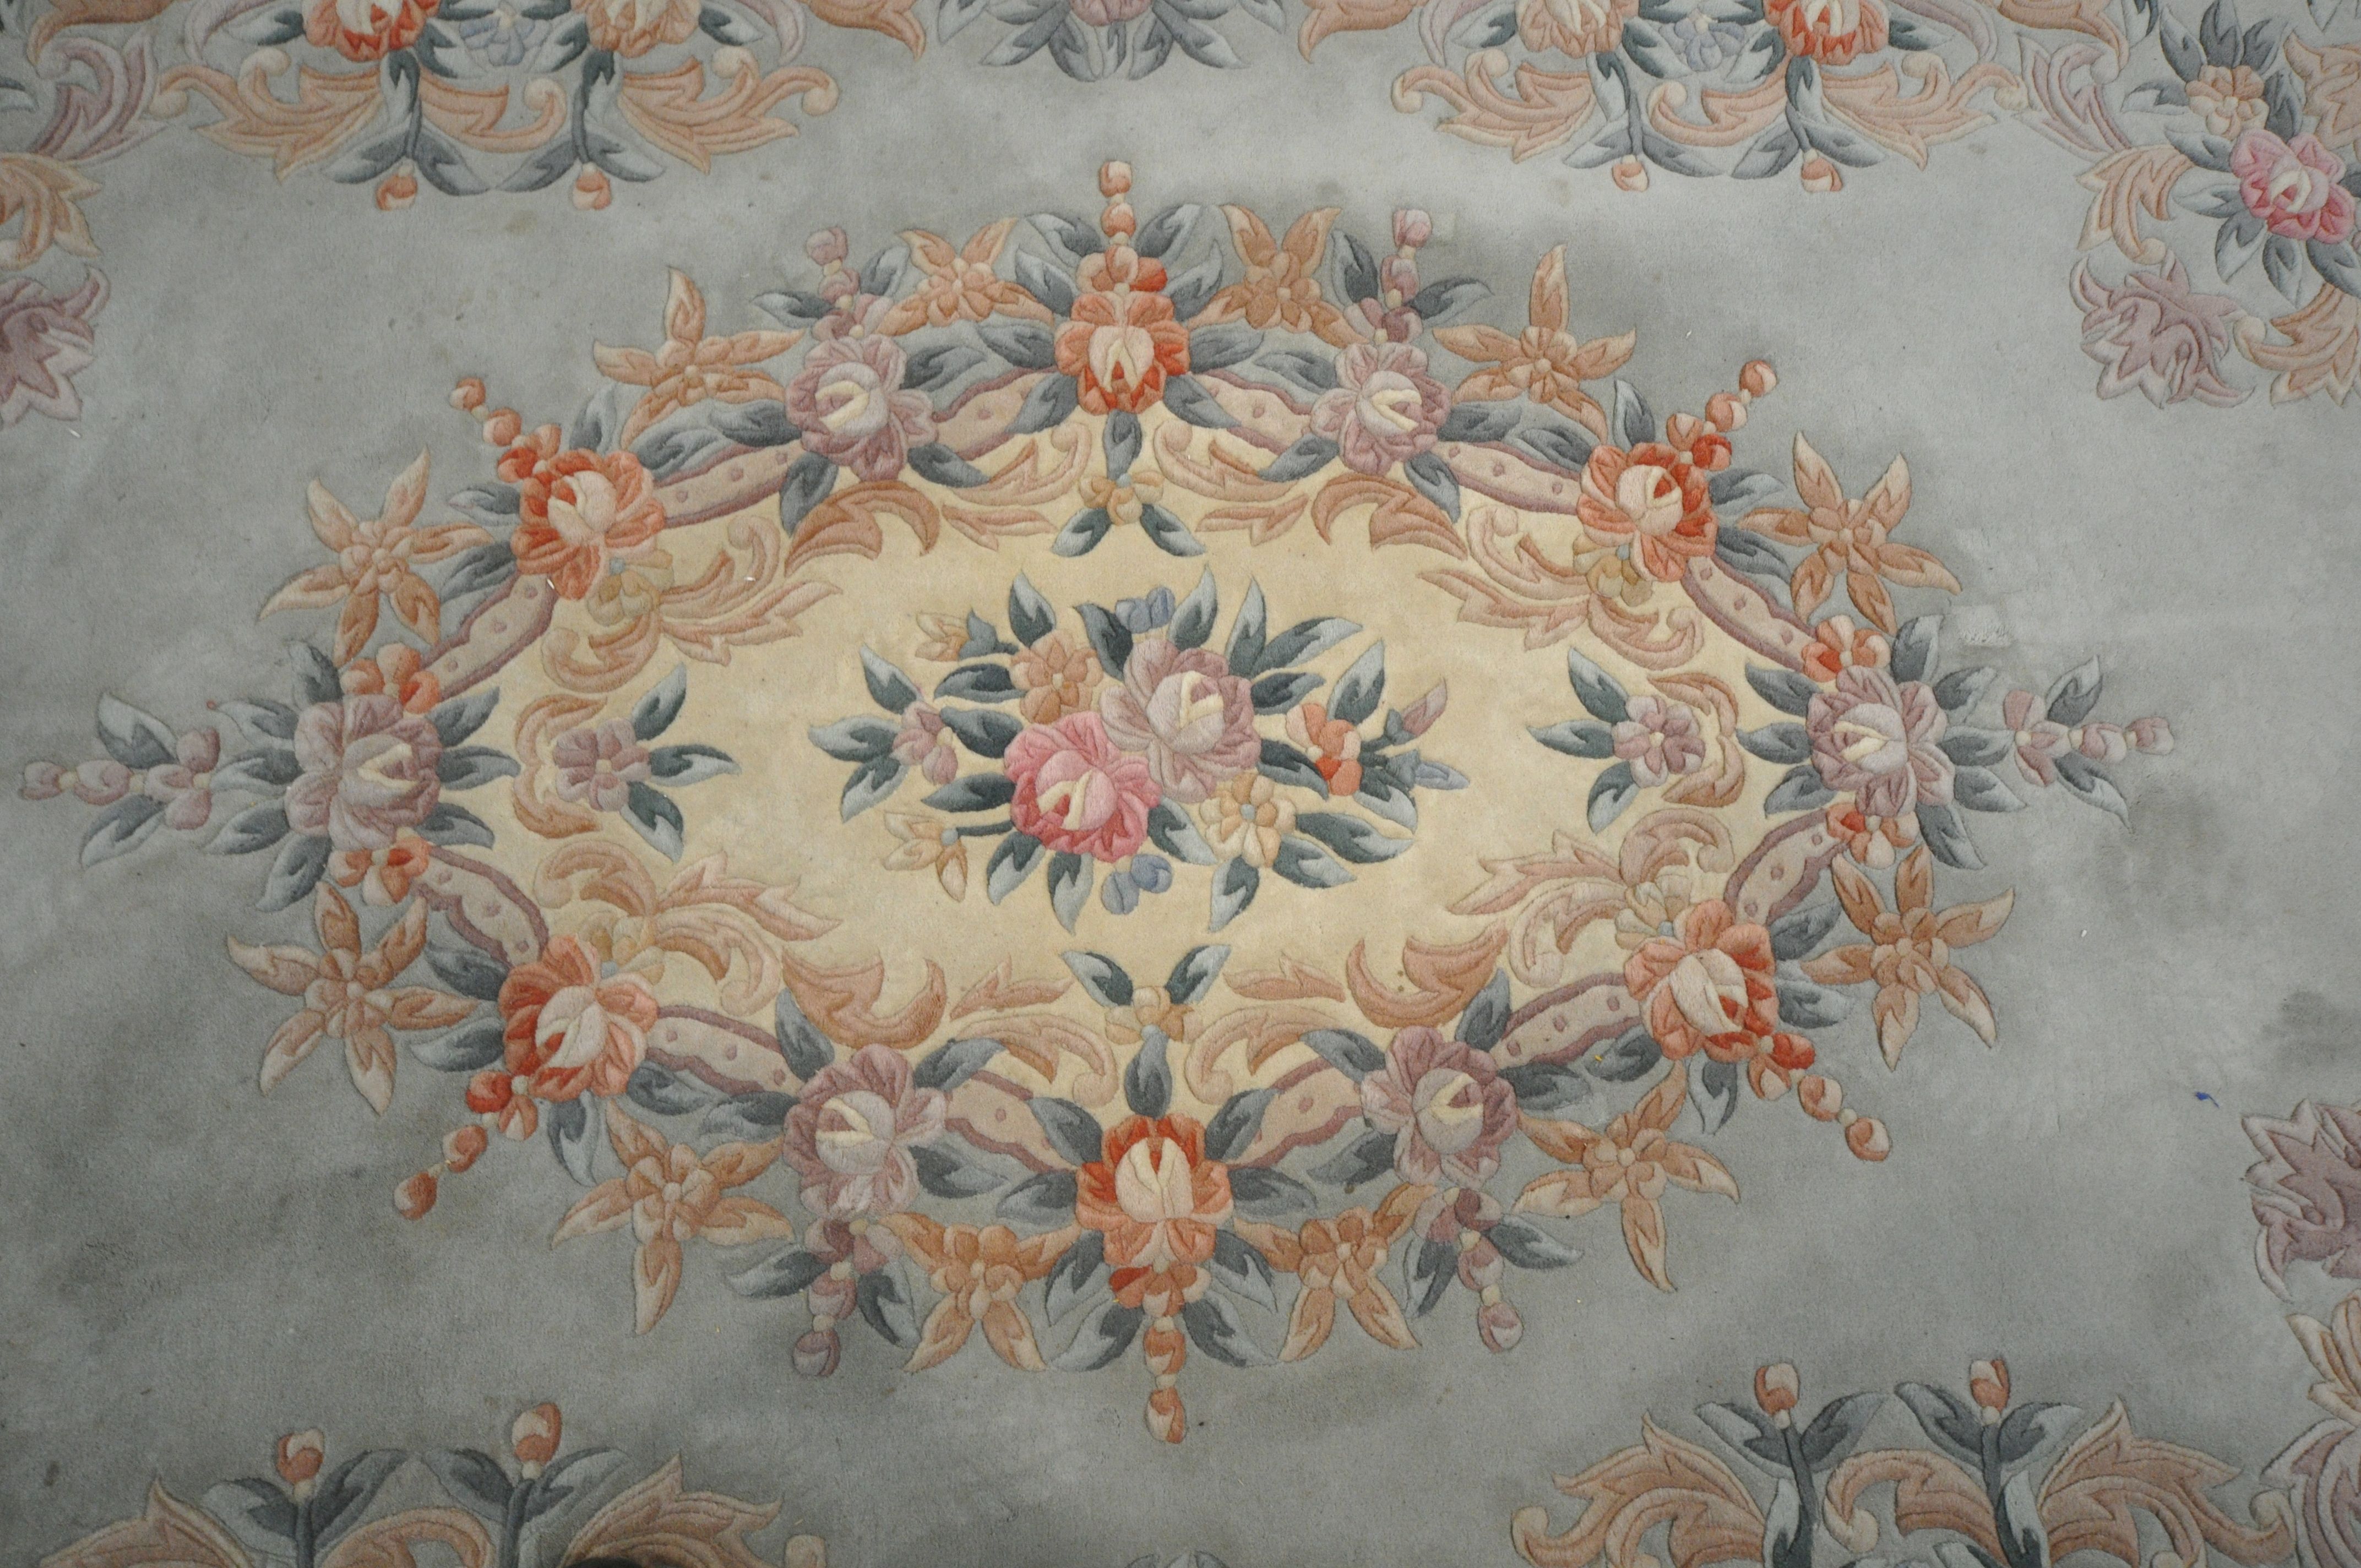 A TEAL CHINESE WOOLEN RUG, with floral border and central design, 284cm x 186cm (condition - in need - Image 3 of 3